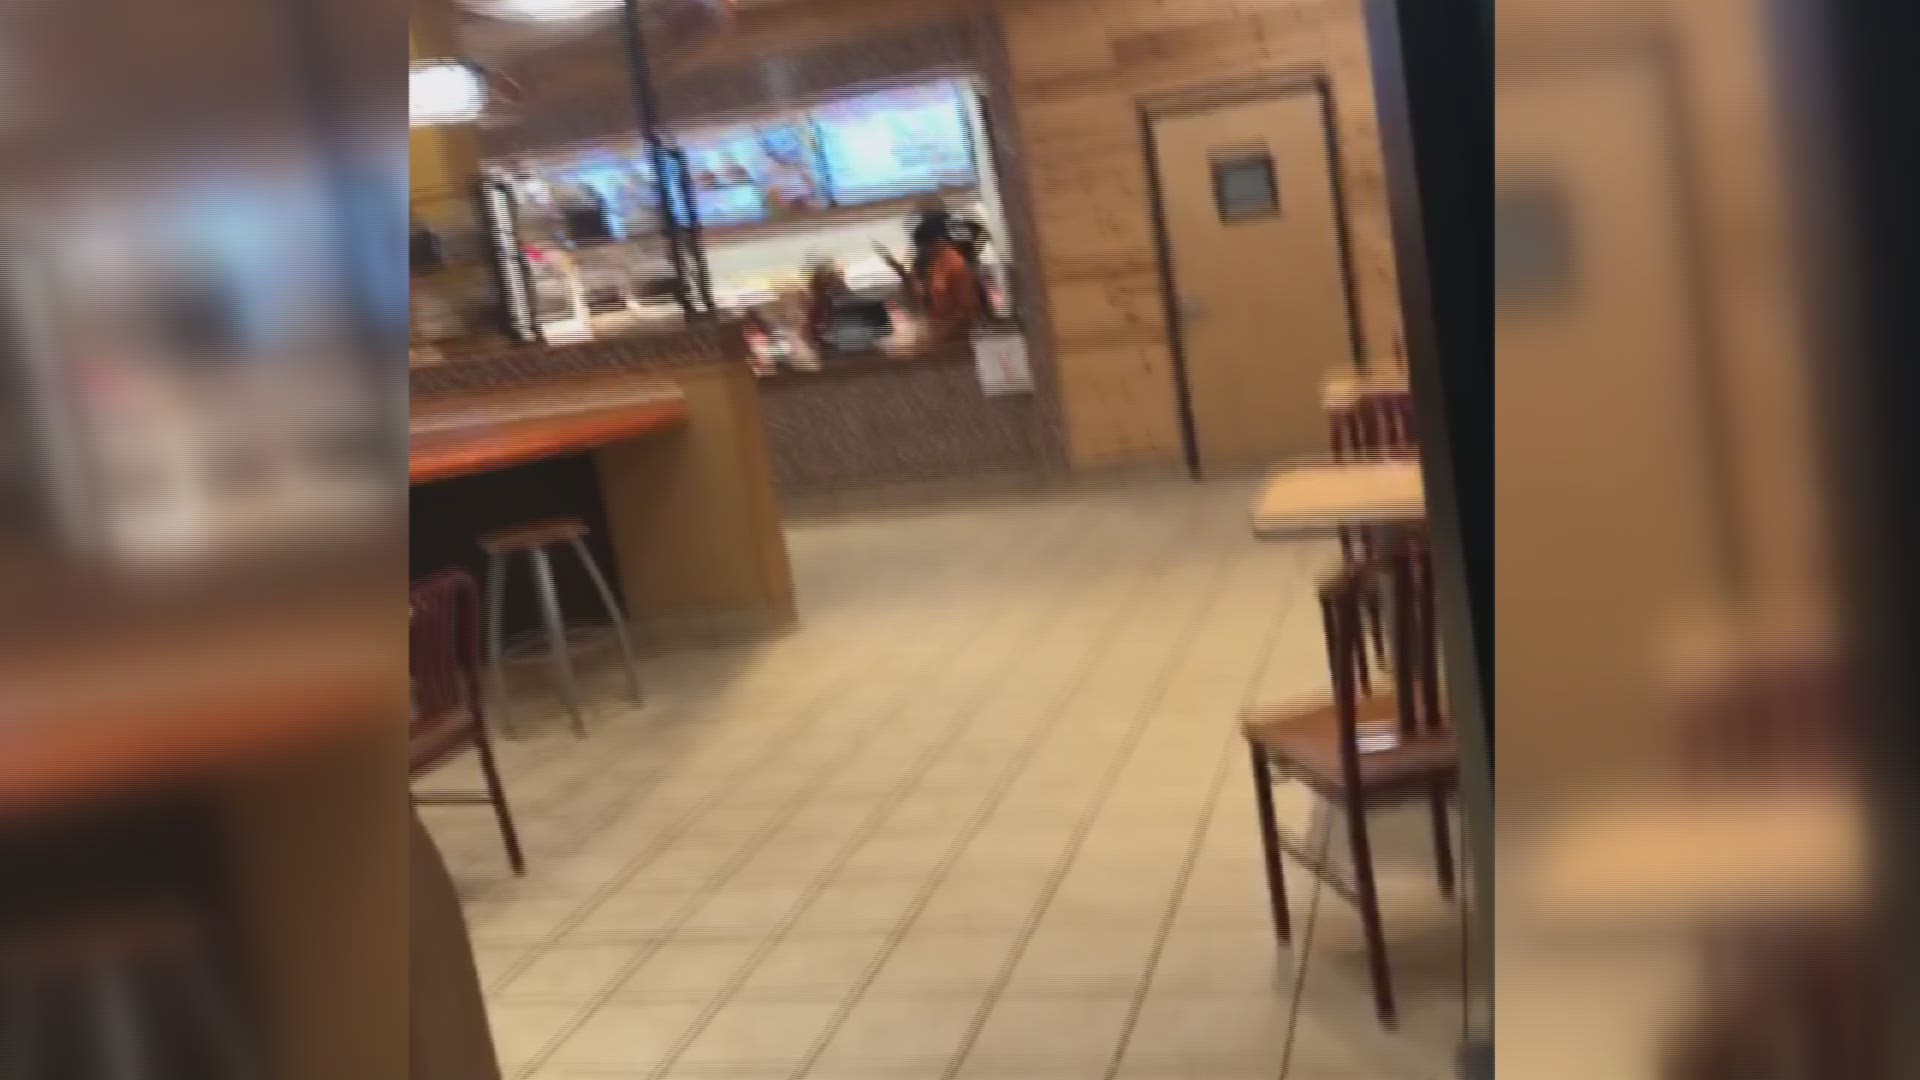 The Popeyes was robbed Friday evening.